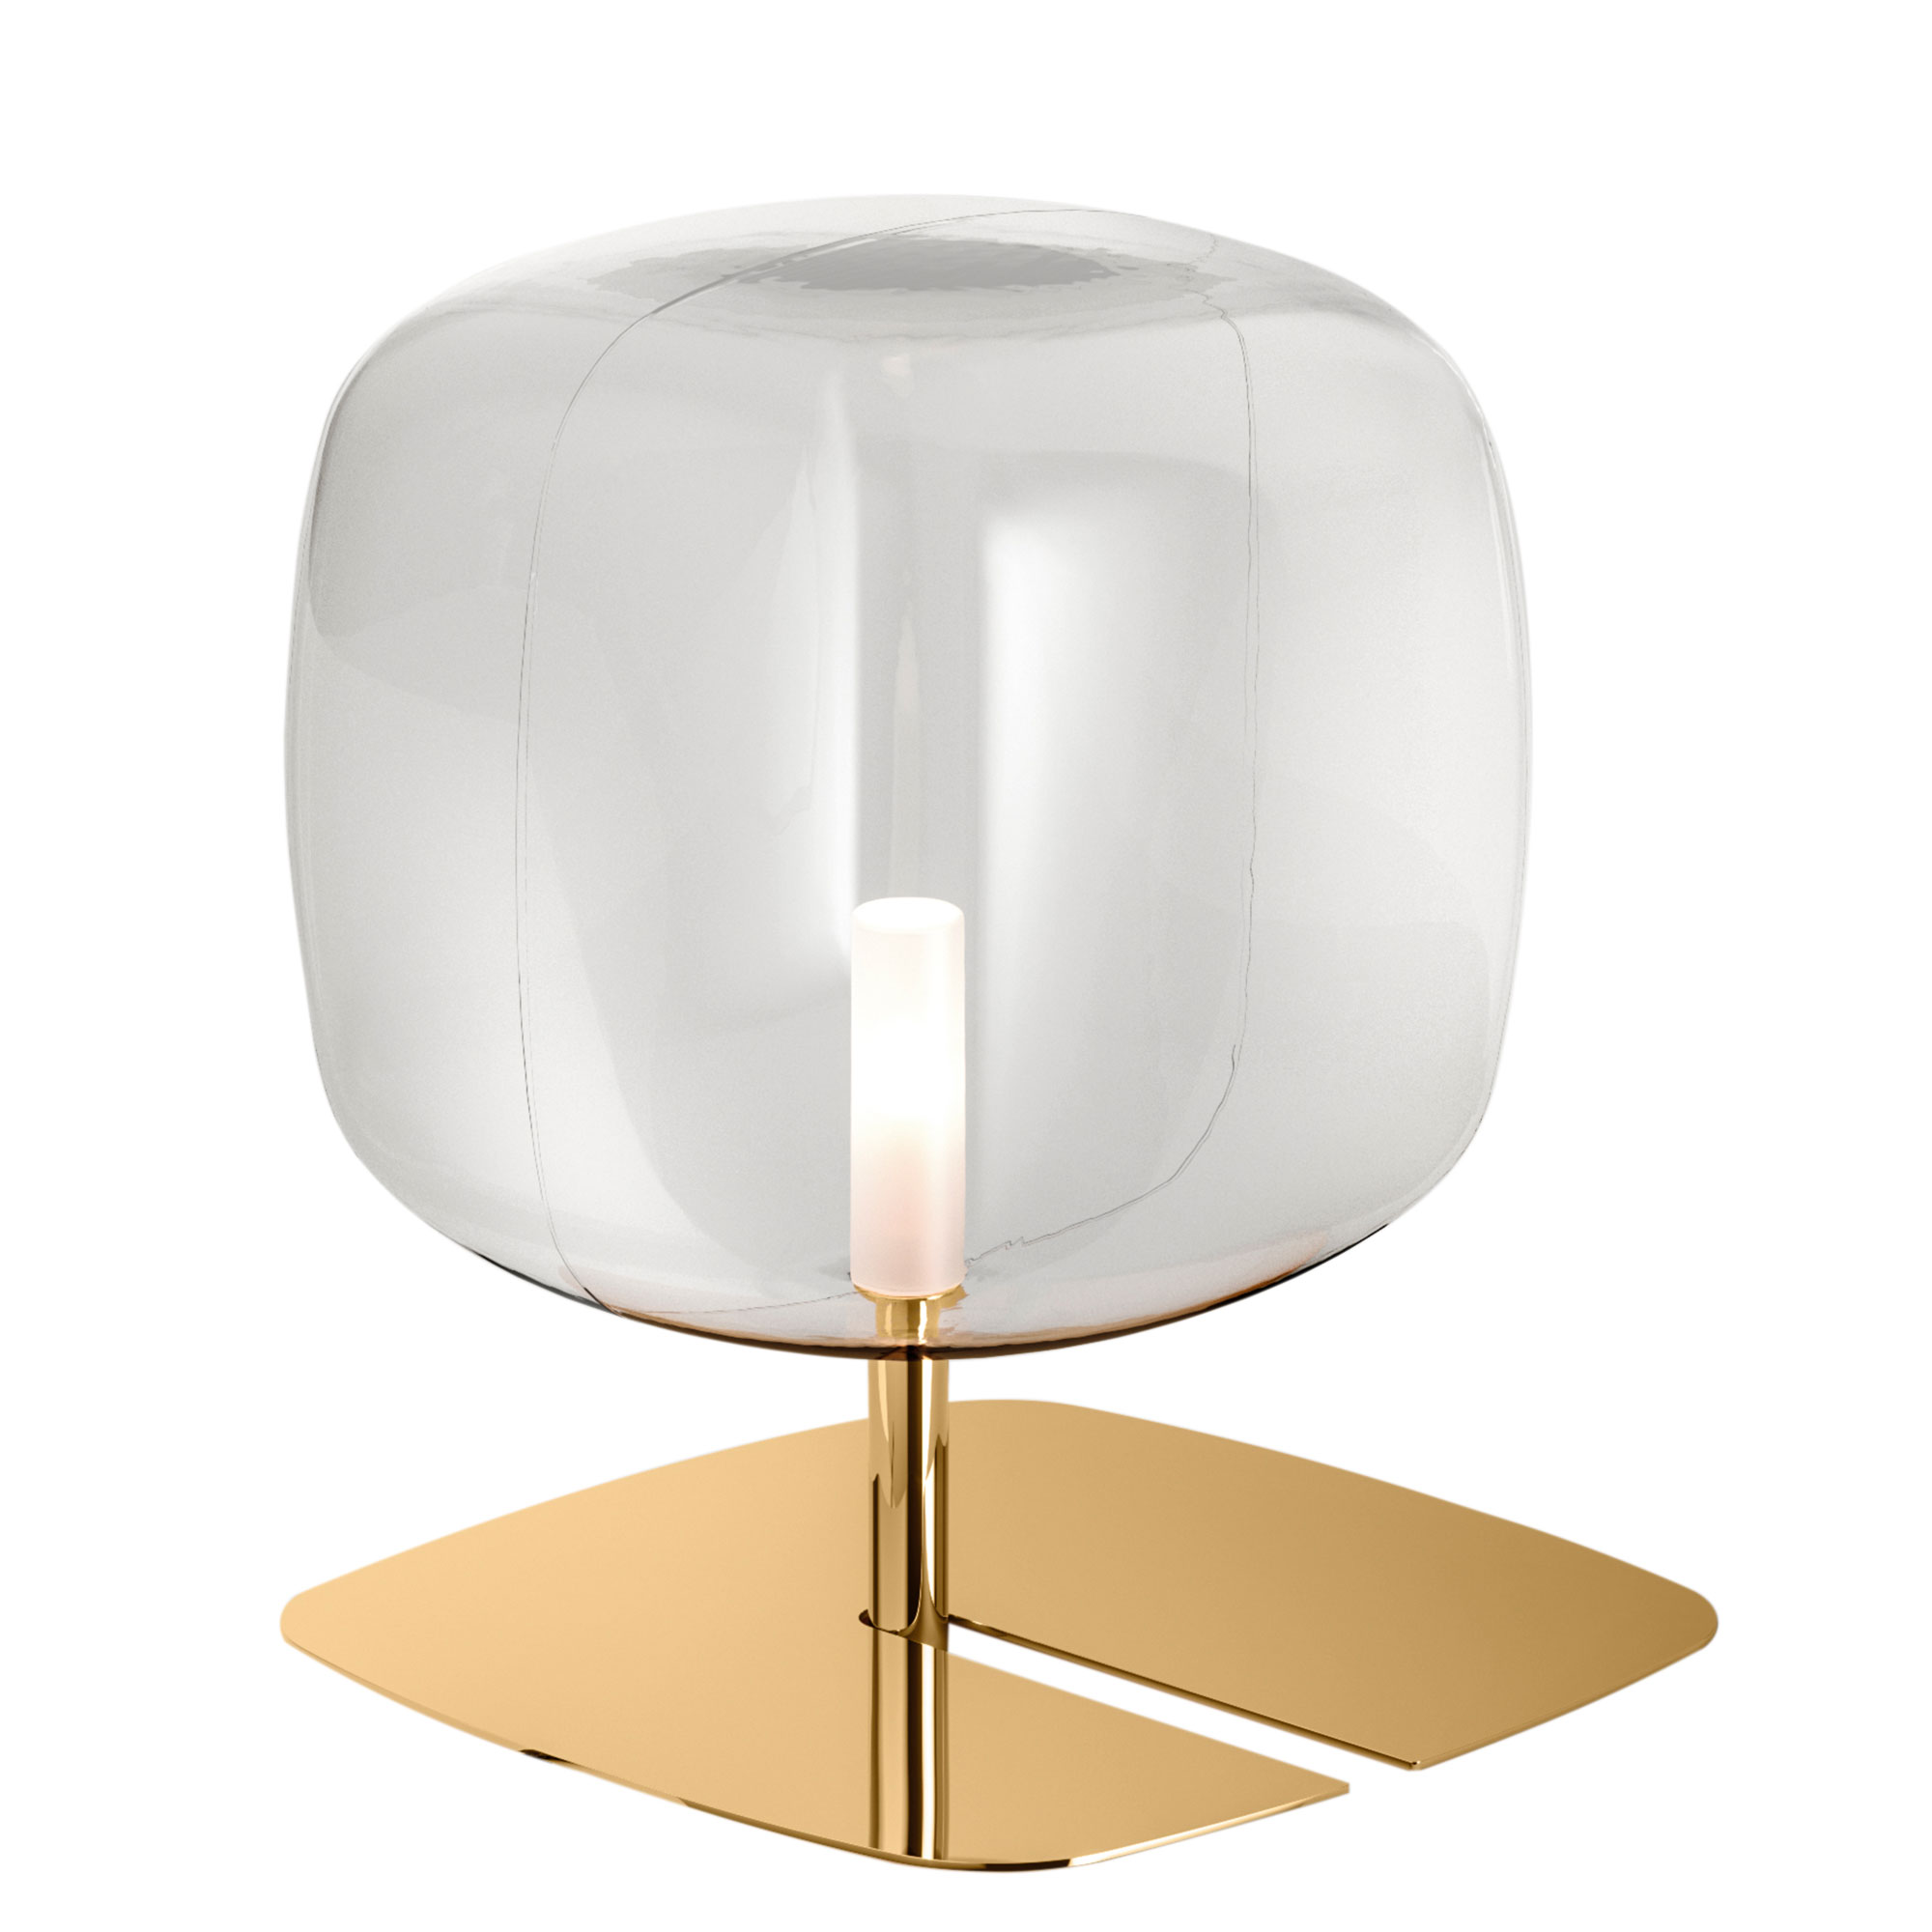 Tonelli Hyperion Table Lamp, Square, Gold Metal | Barker & Stonehouse